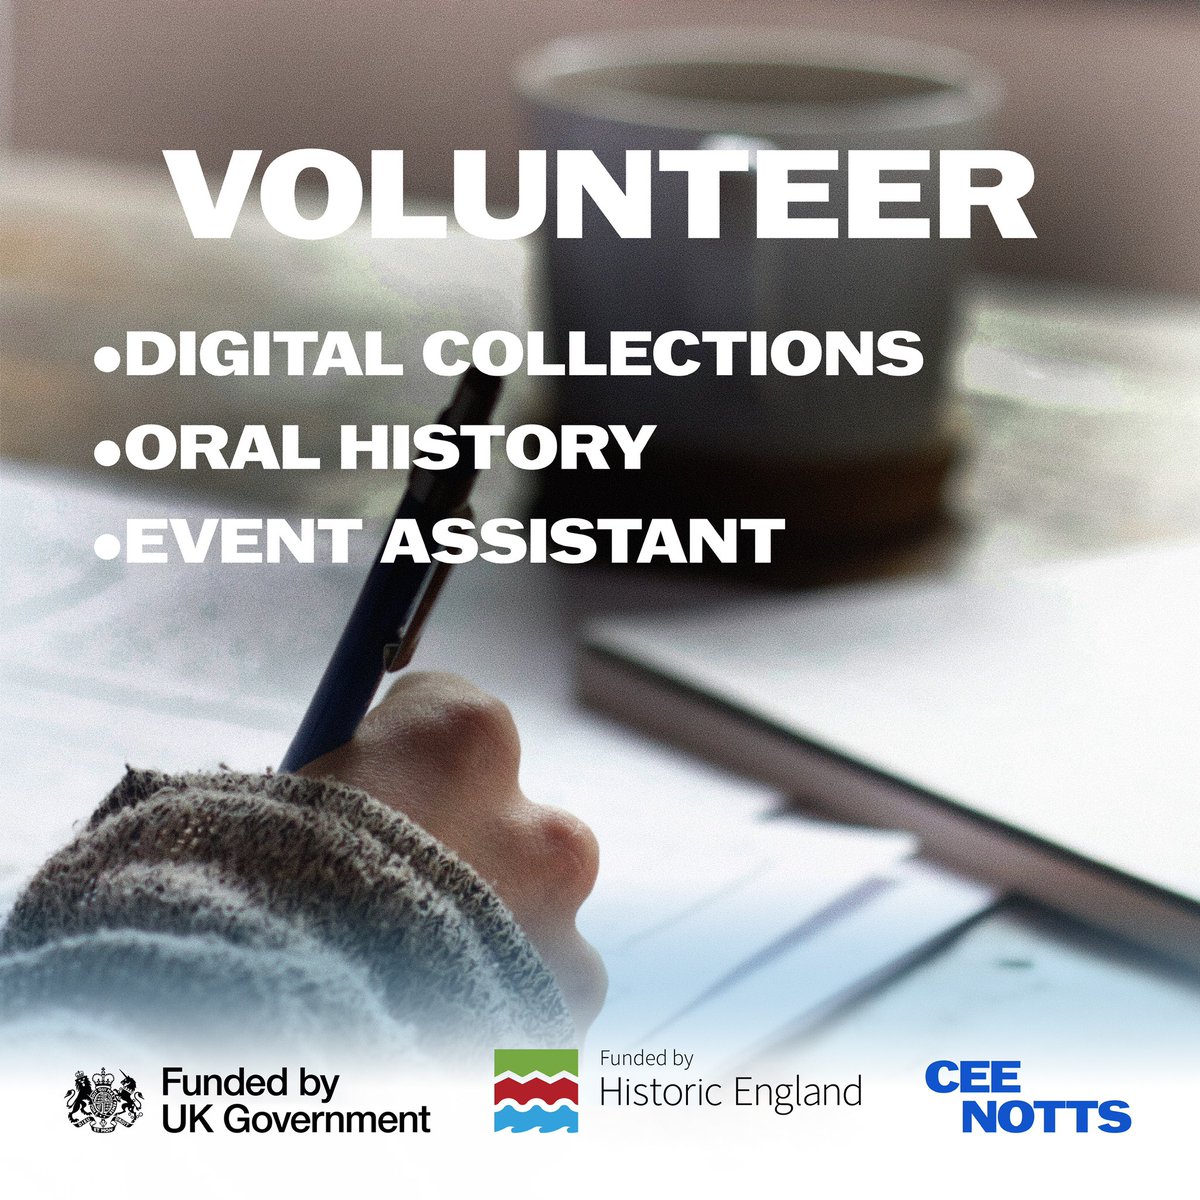 Do you want to support the work of CEE Notts? We are looking for volunteers to help us with our Capturing Shadows programme, preserving the memory of Mansfield's Central and Eastern European communities from past and present